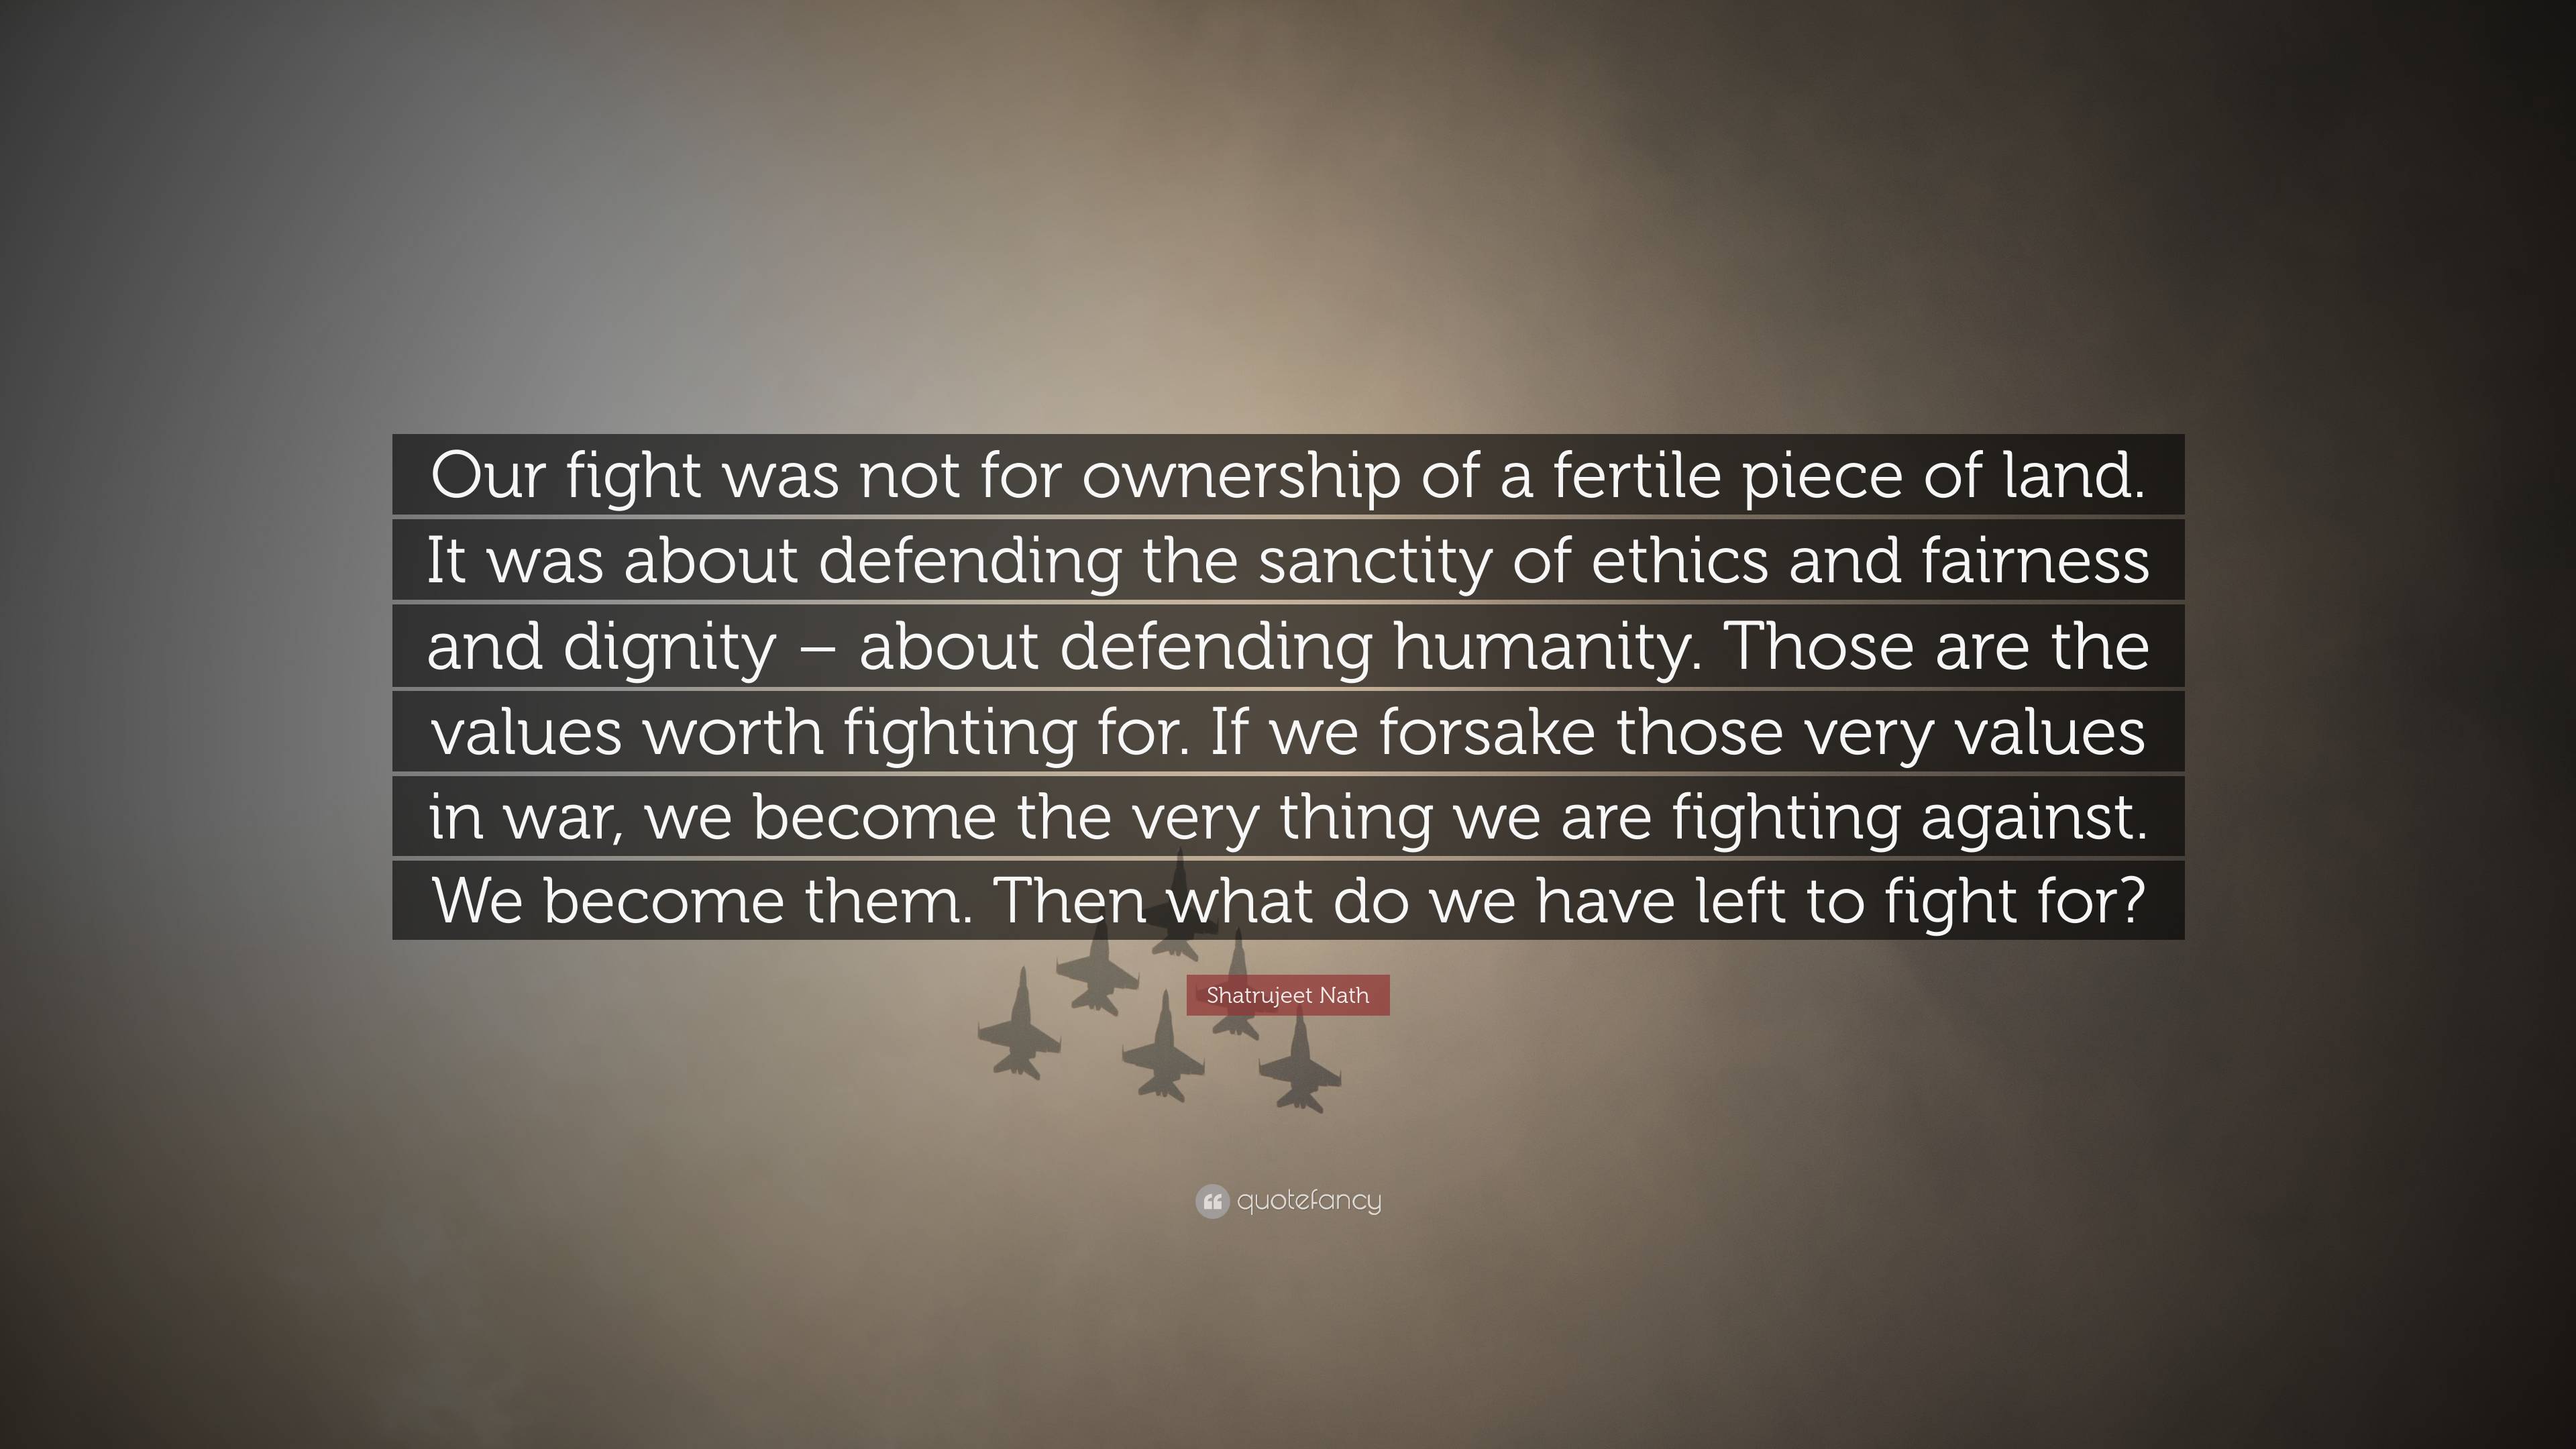 https://quotefancy.com/media/wallpaper/3840x2160/7439620-Shatrujeet-Nath-Quote-Our-fight-was-not-for-ownership-of-a-fertile.jpg